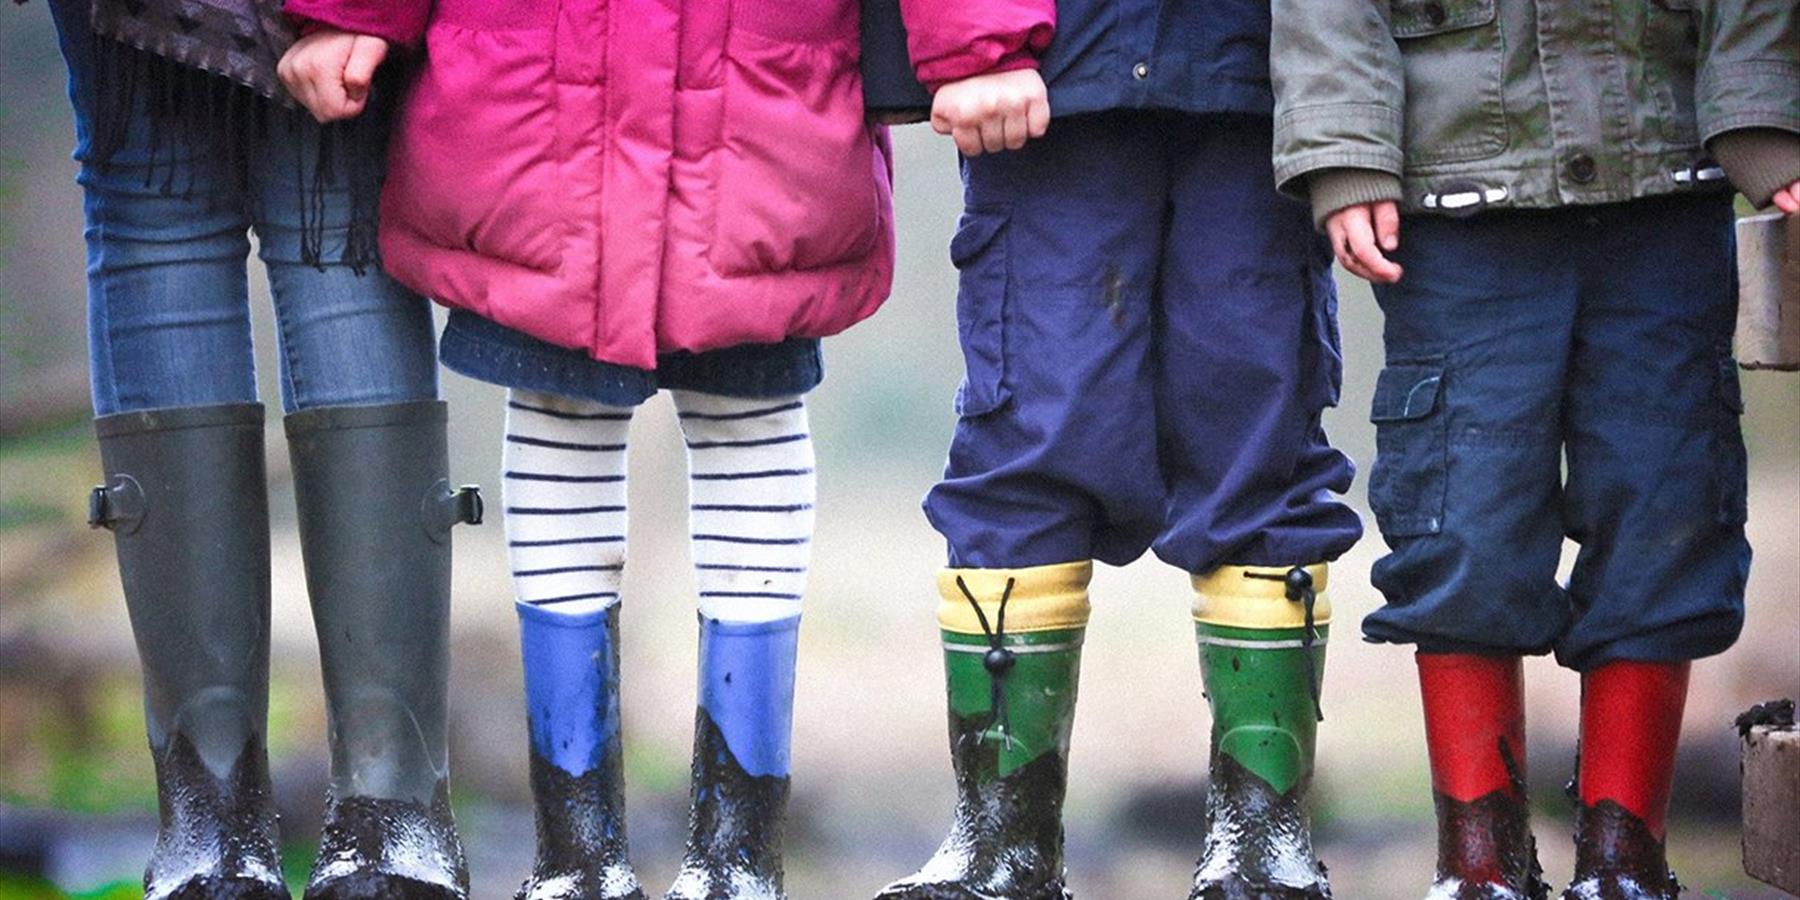 Four kids with muddy boots